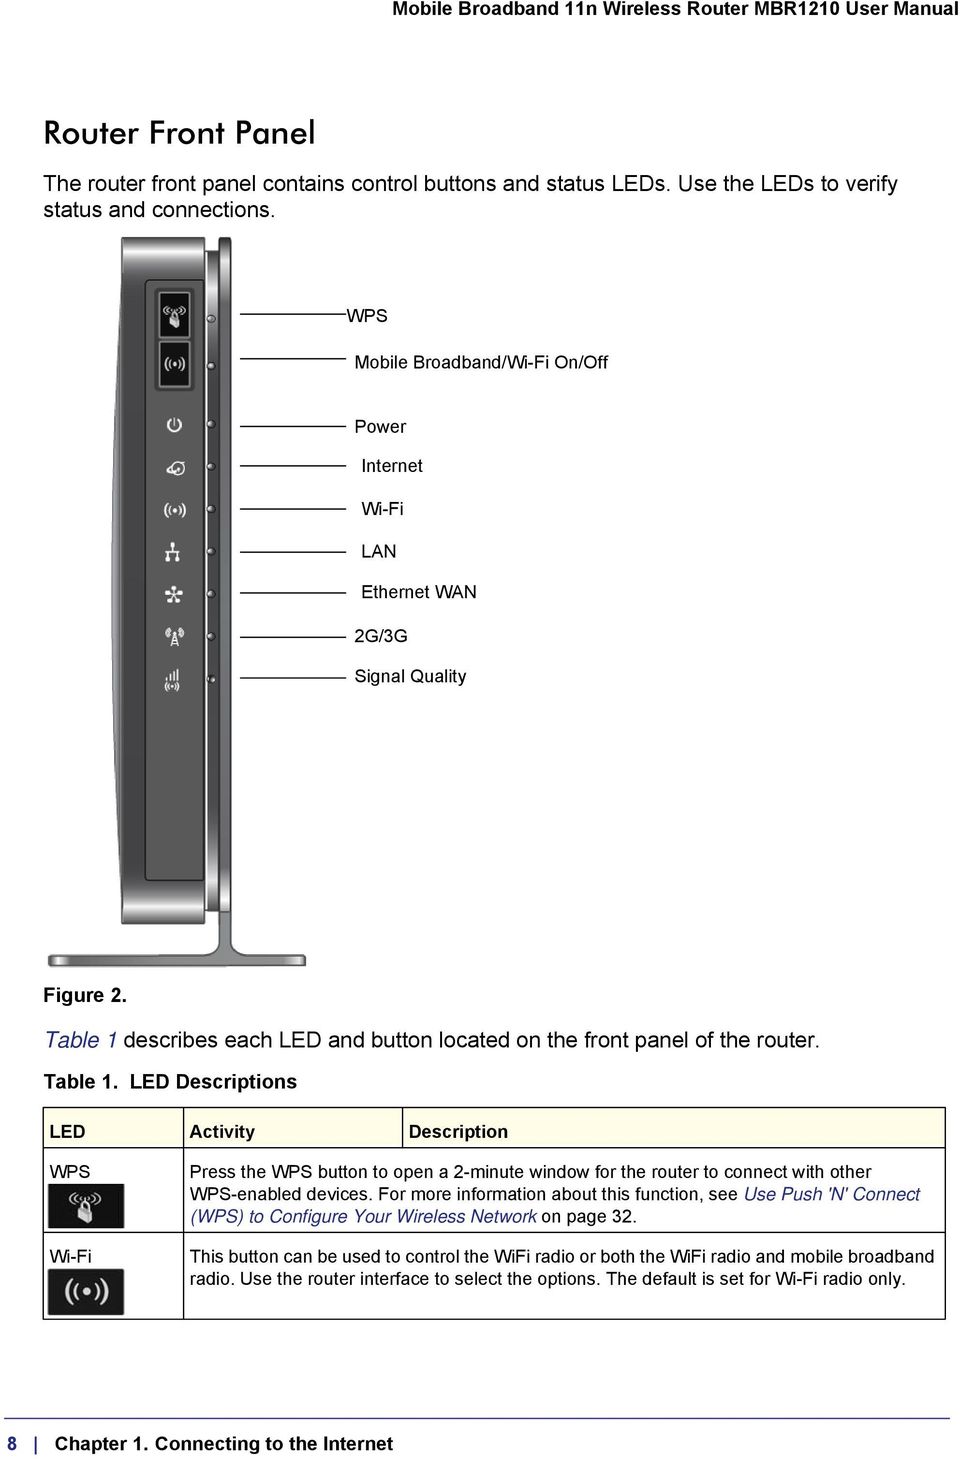 describes each LED and button located on the front panel of the router. Table 1.